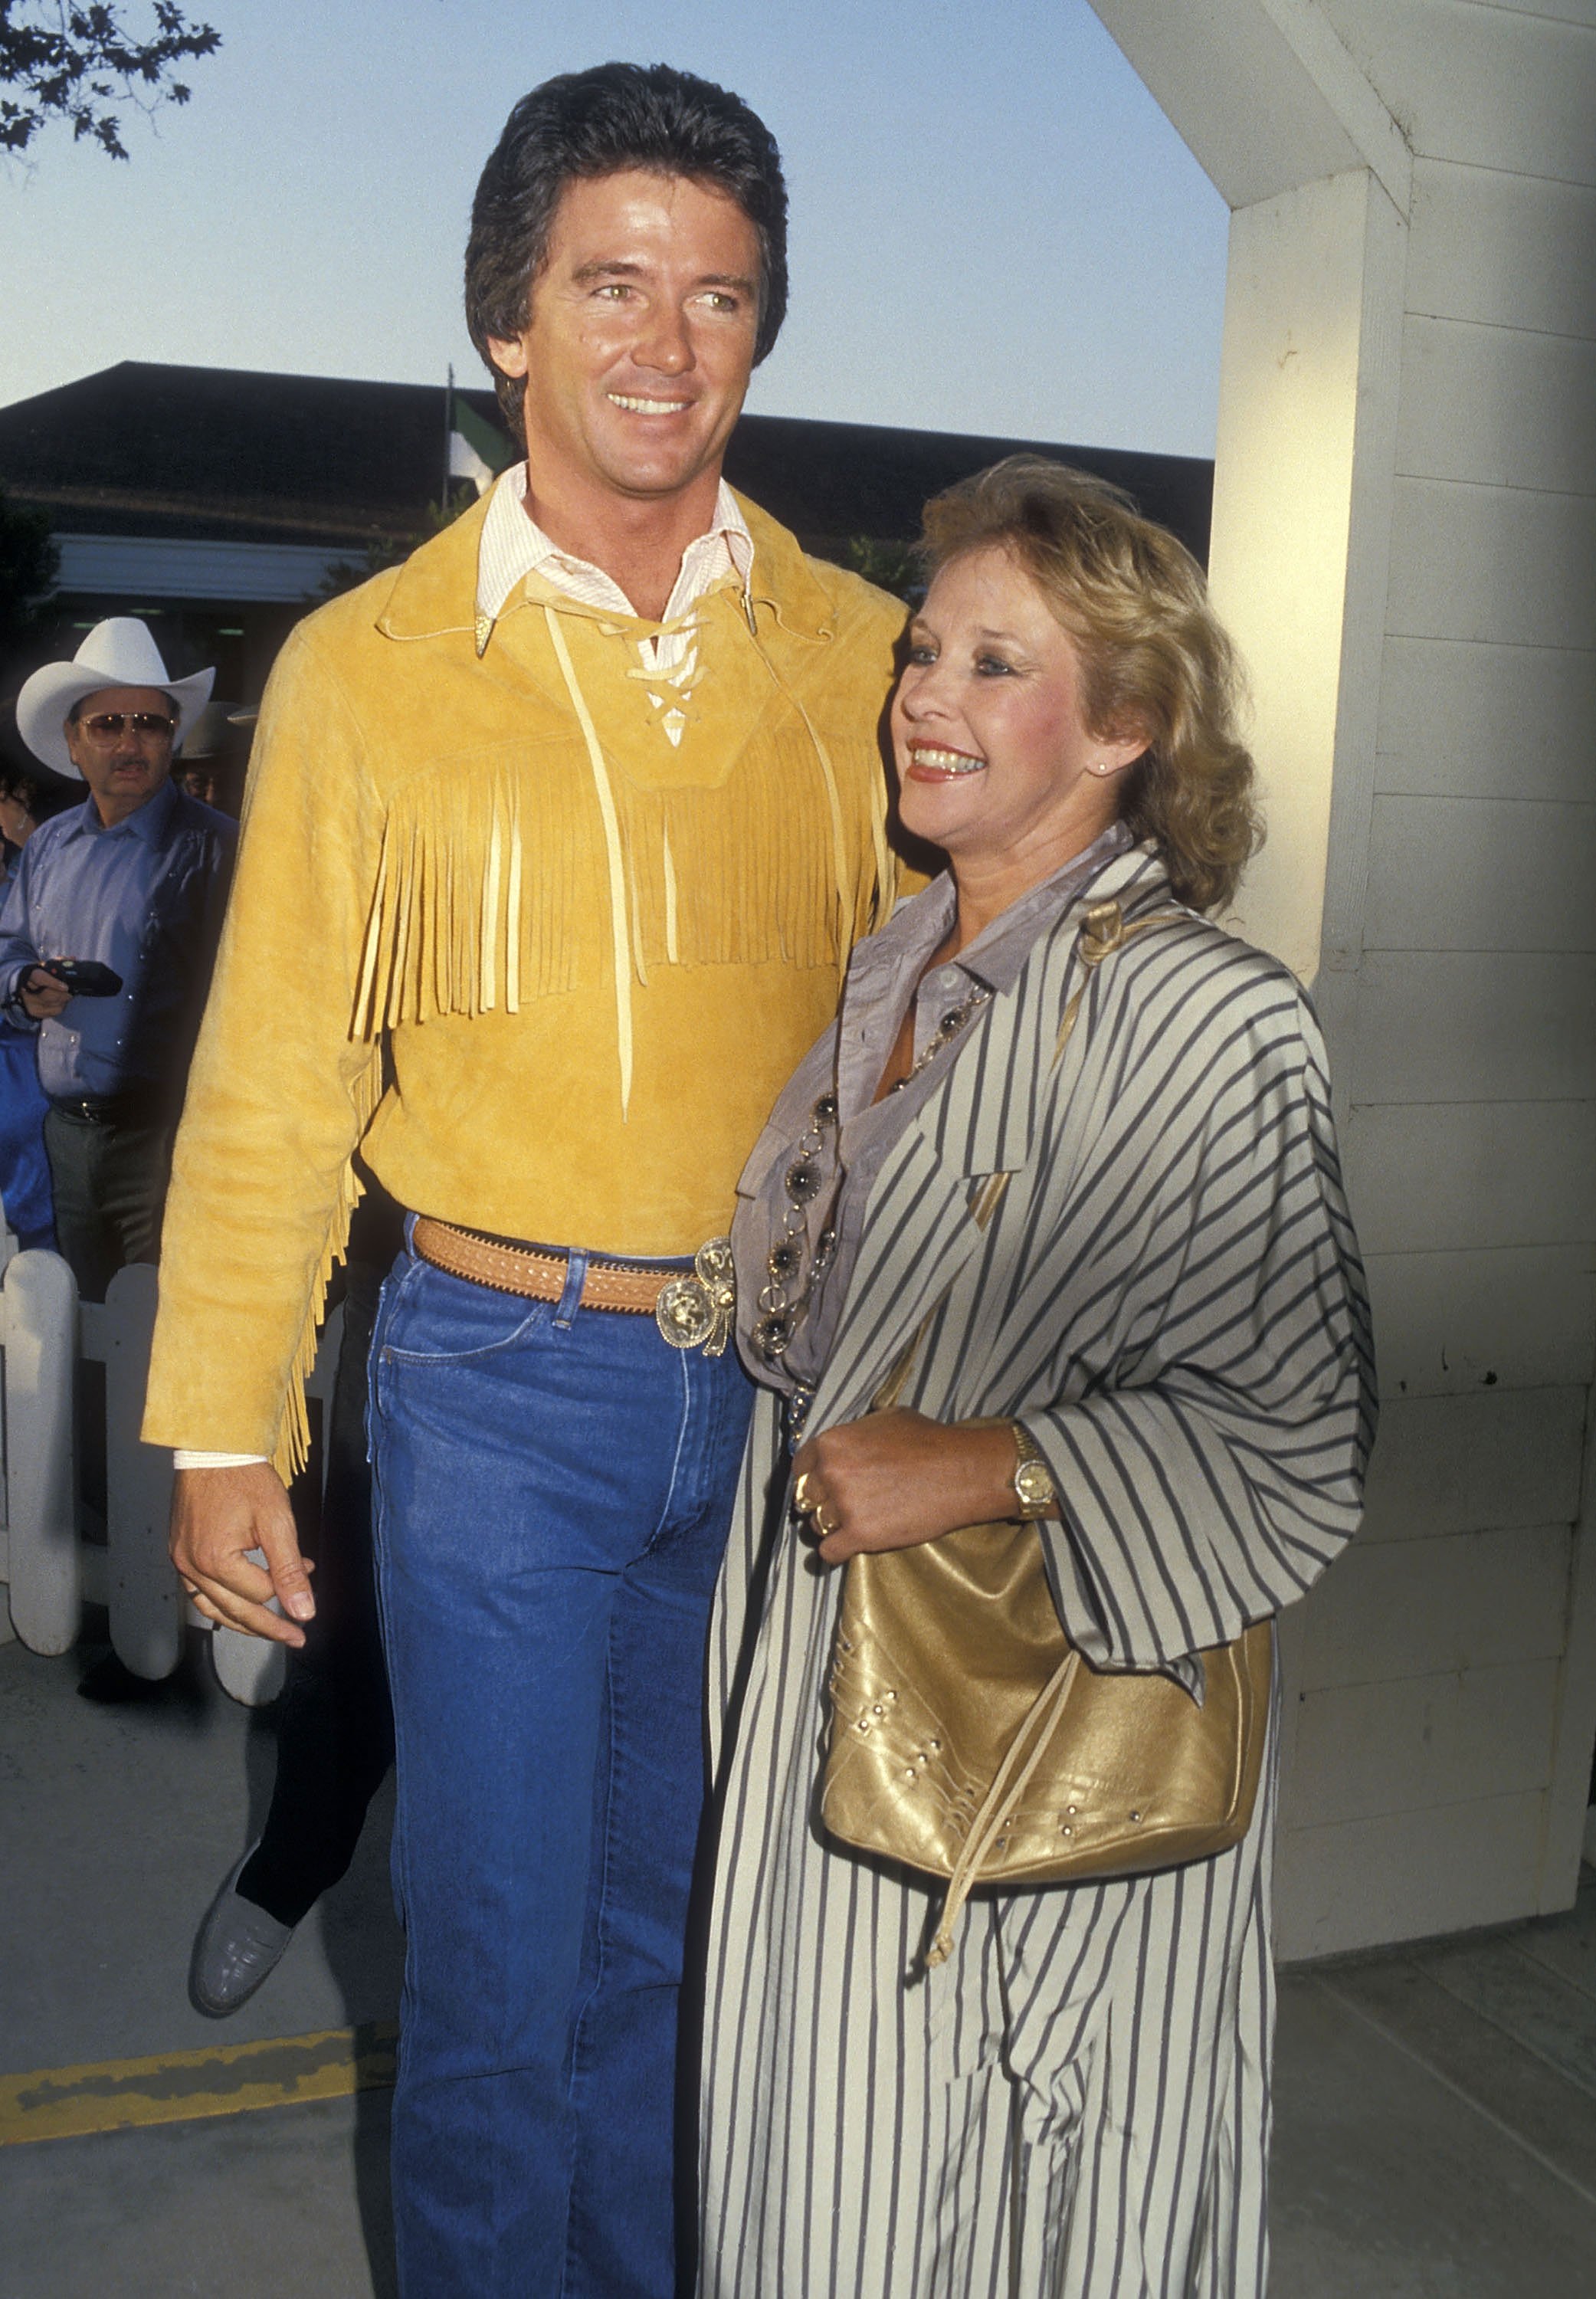 Actor Patrick Duffy and wife Carlyn at the Fifth Annual Golden Boot Awards on August 15, 1987 at the Los Angeles Equestrian Center in Burbank, California.  | Source: Getty Images